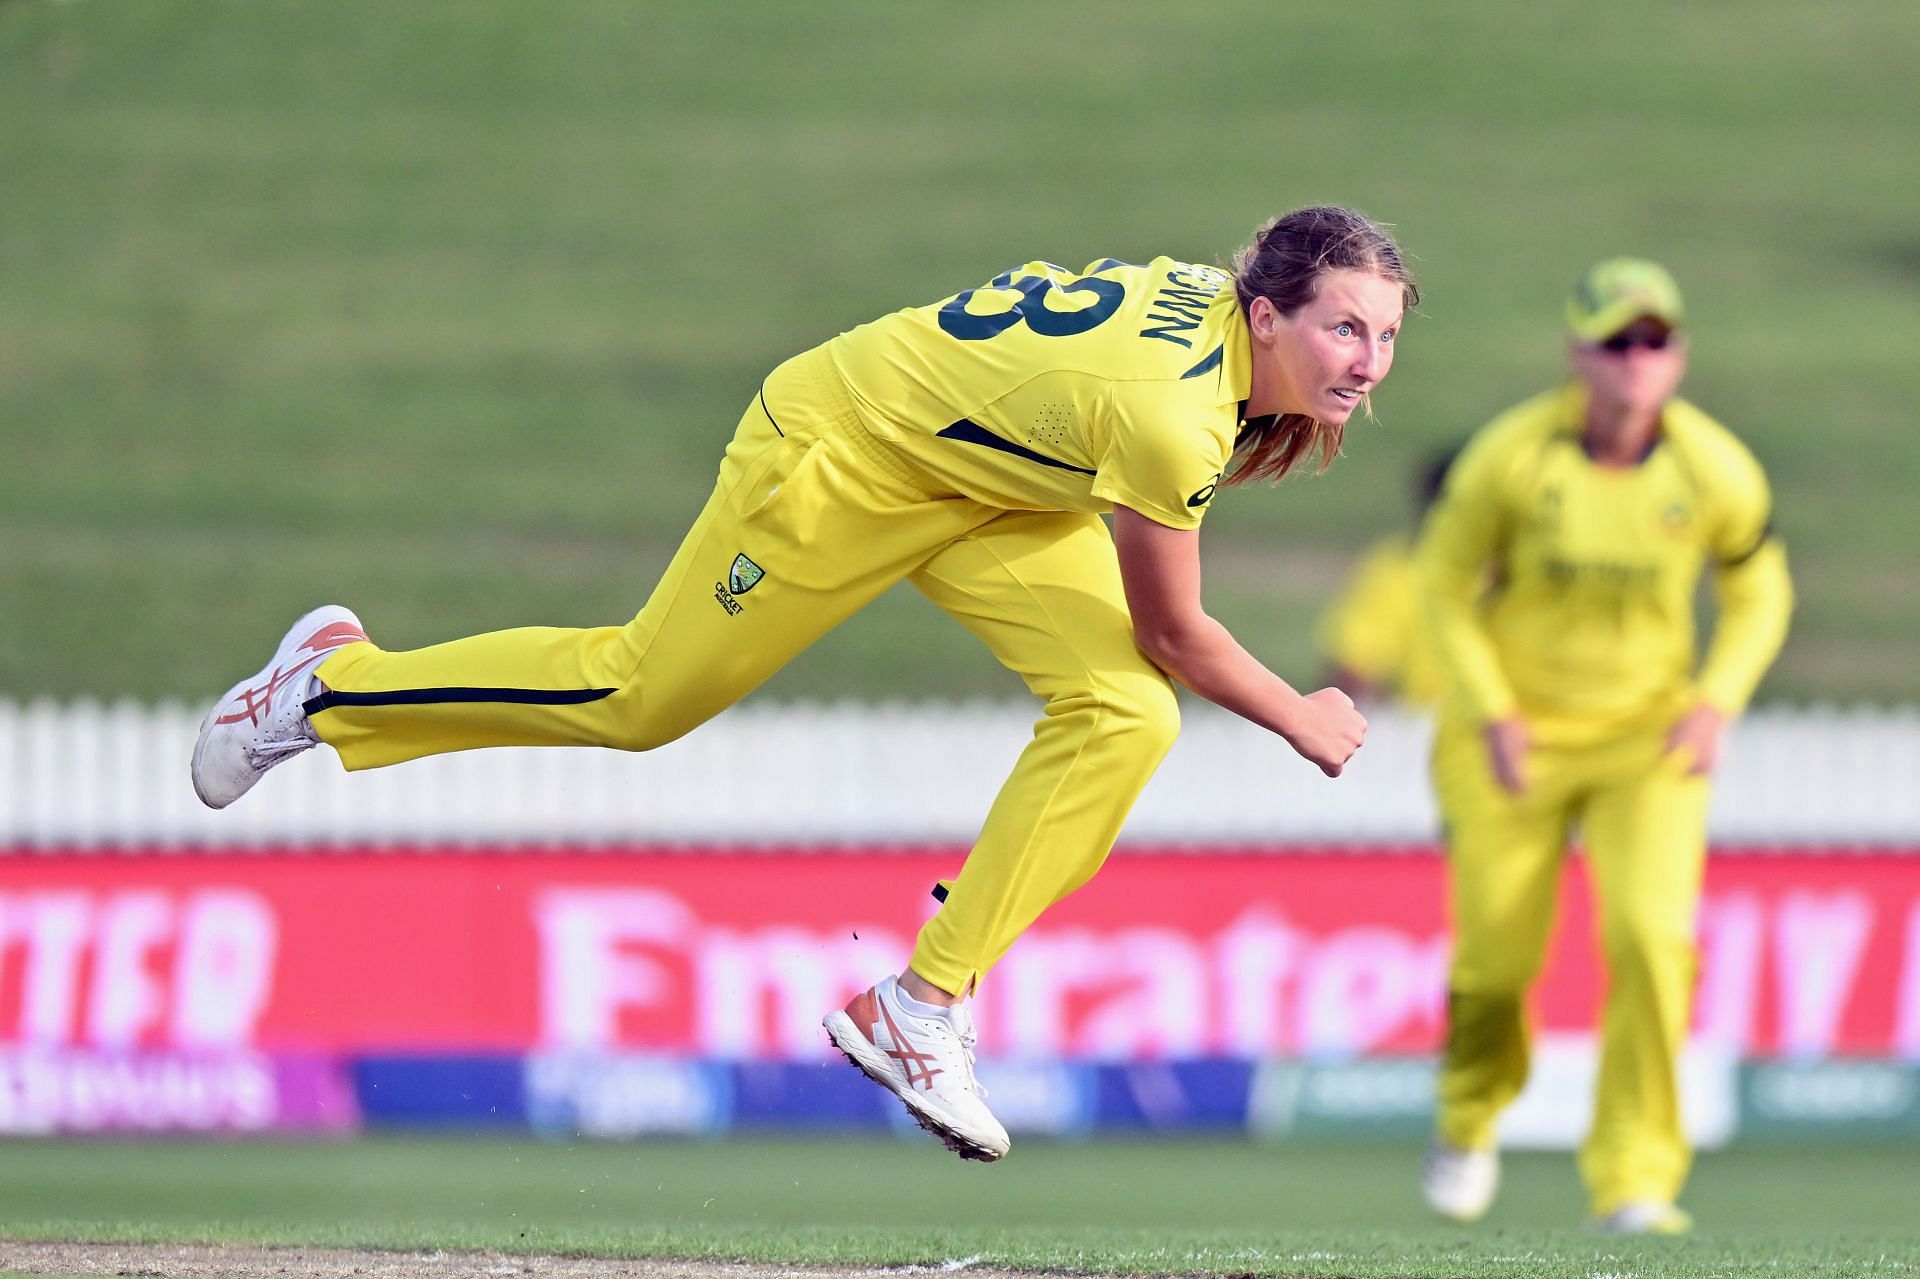 Australia&#039;s Darcie Brown will be among the biggest stars to watch out for at the 2022 Women&#039;s World Cup